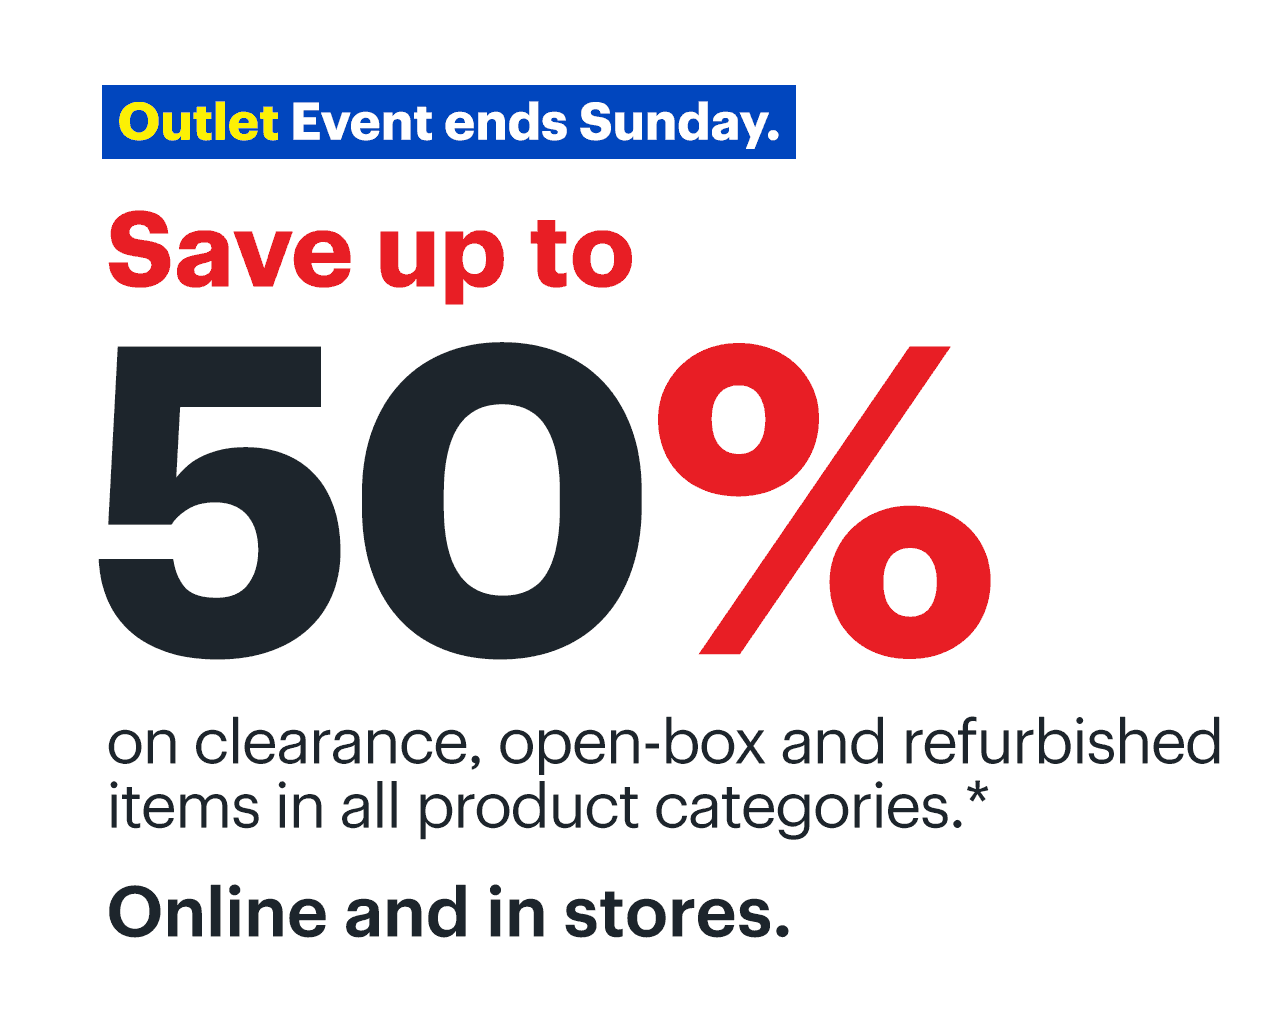 Outlet Event ends Sunday. Save up to 50% on clearance, open-box and refurbished items in all product categories. Online and in store. Shop now. Reference disclaimer.